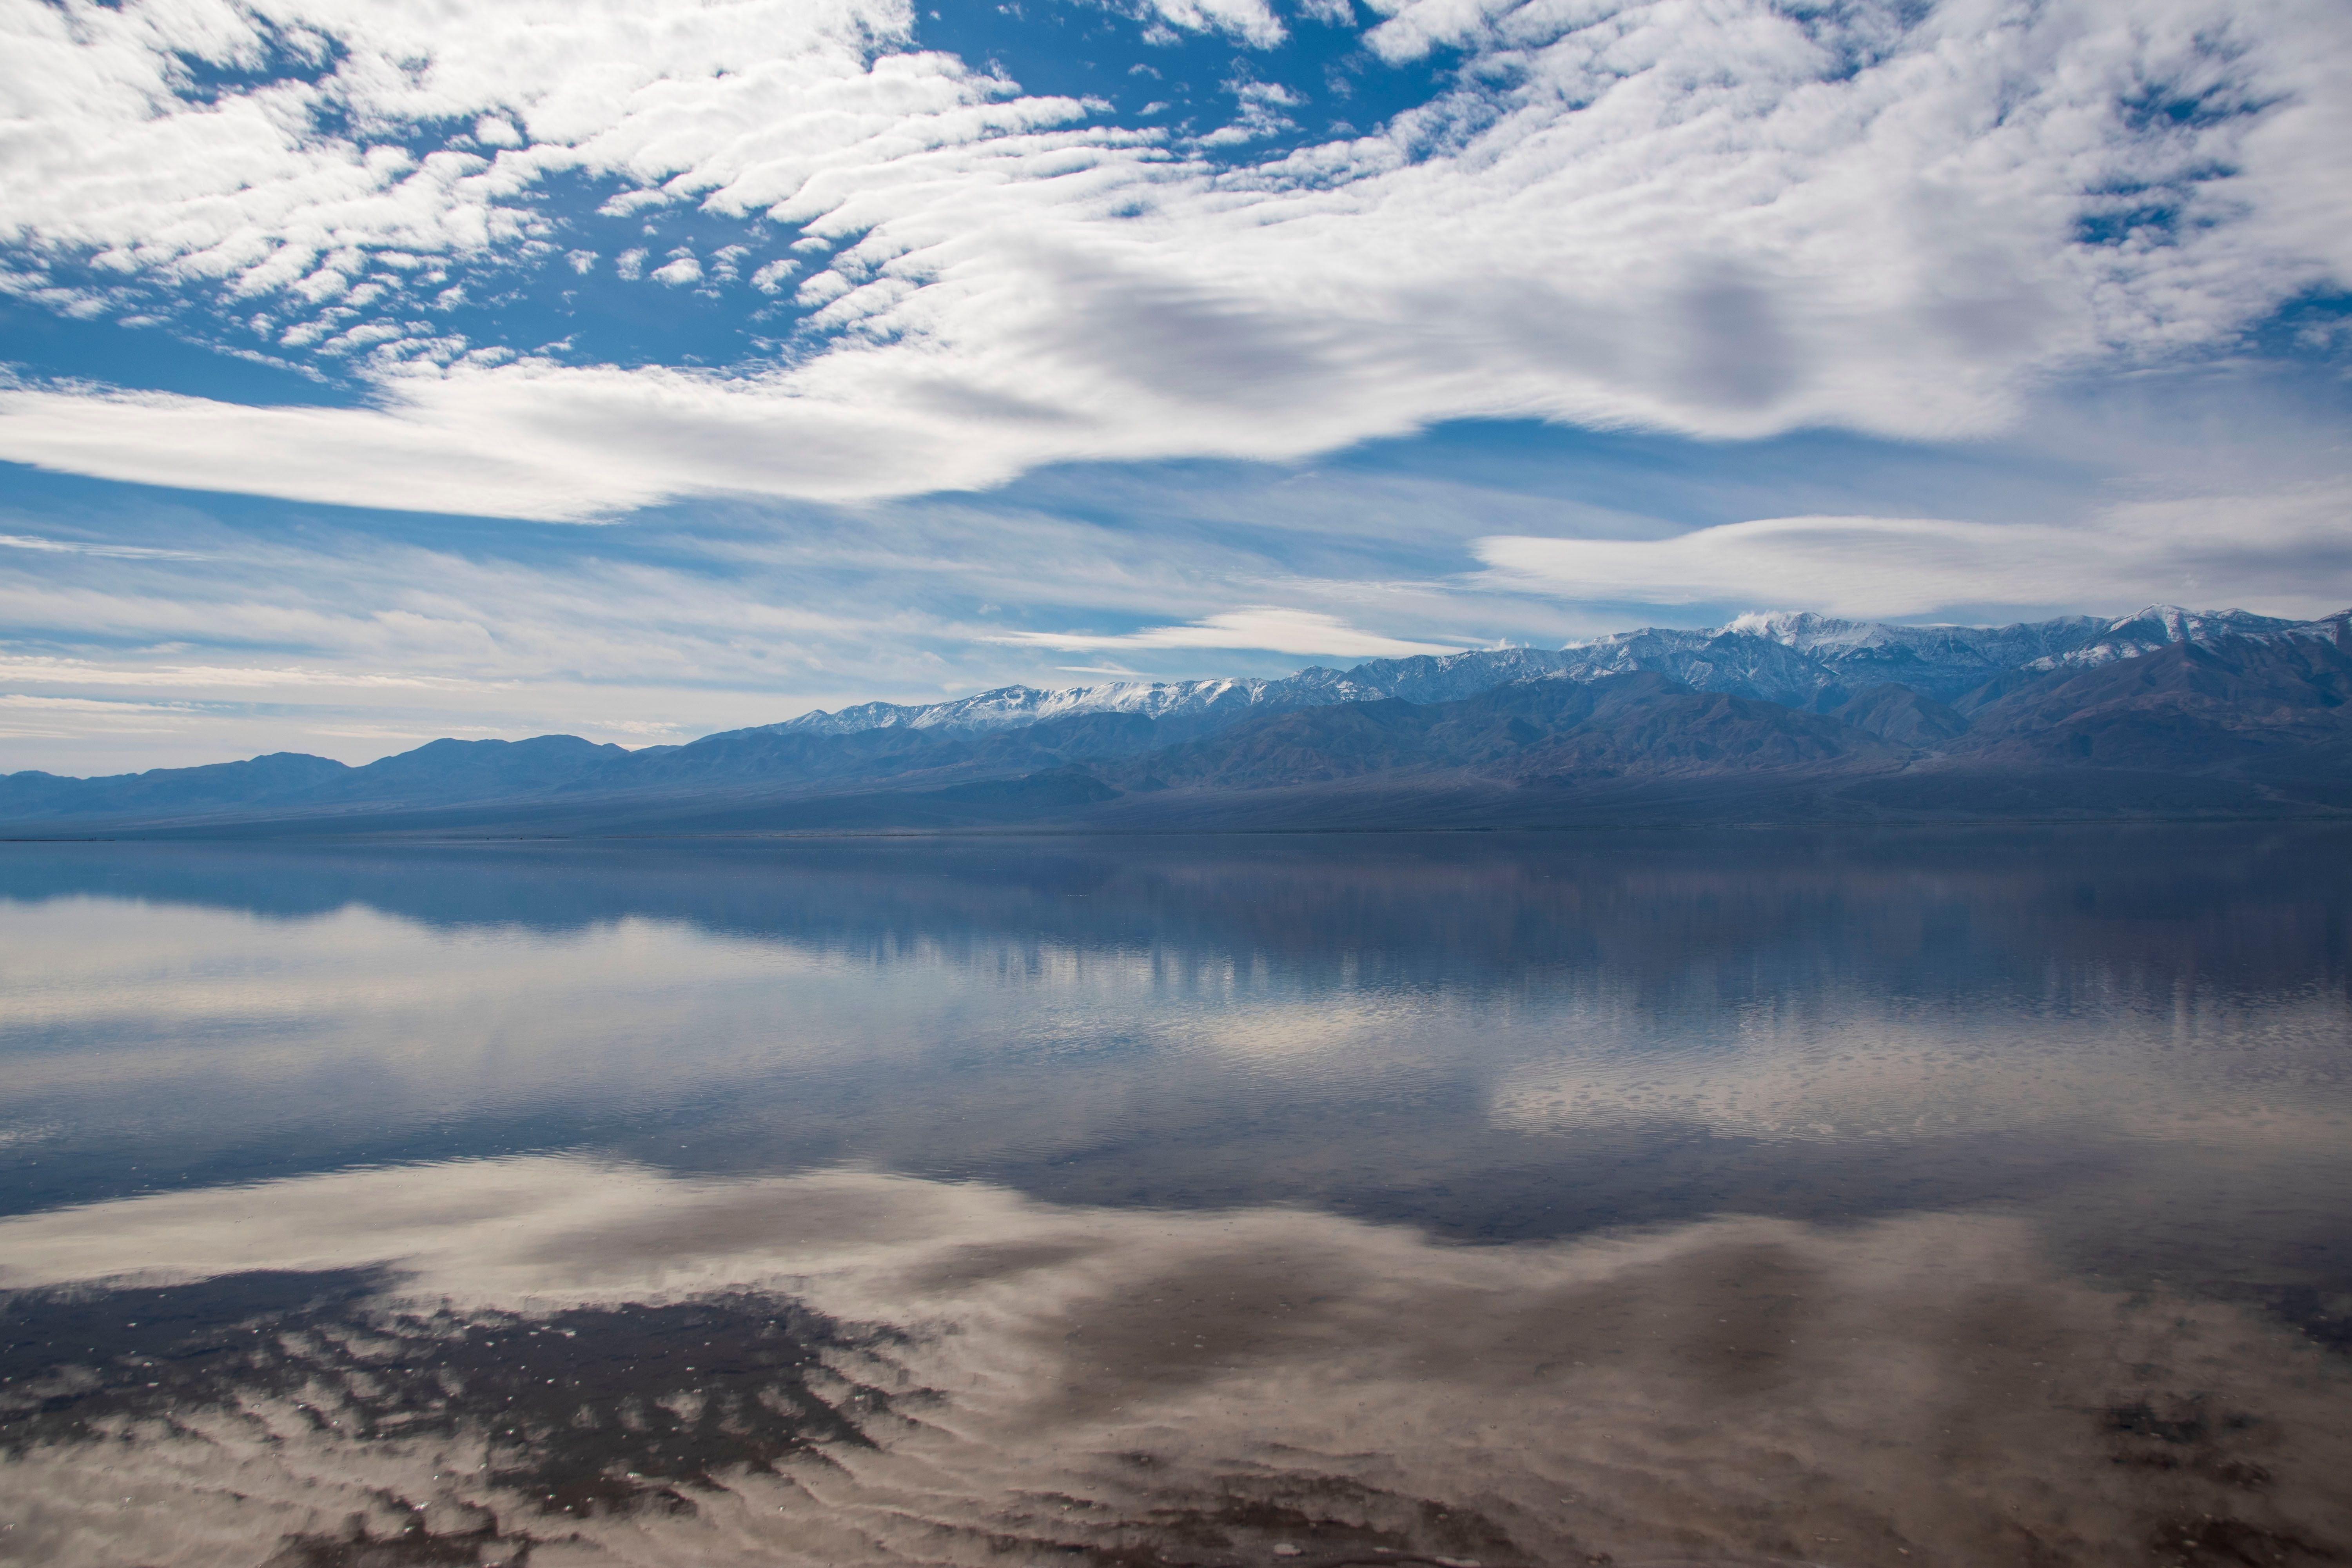 Visit Death Valley And Get A Rare Glimpse Of Its Lake